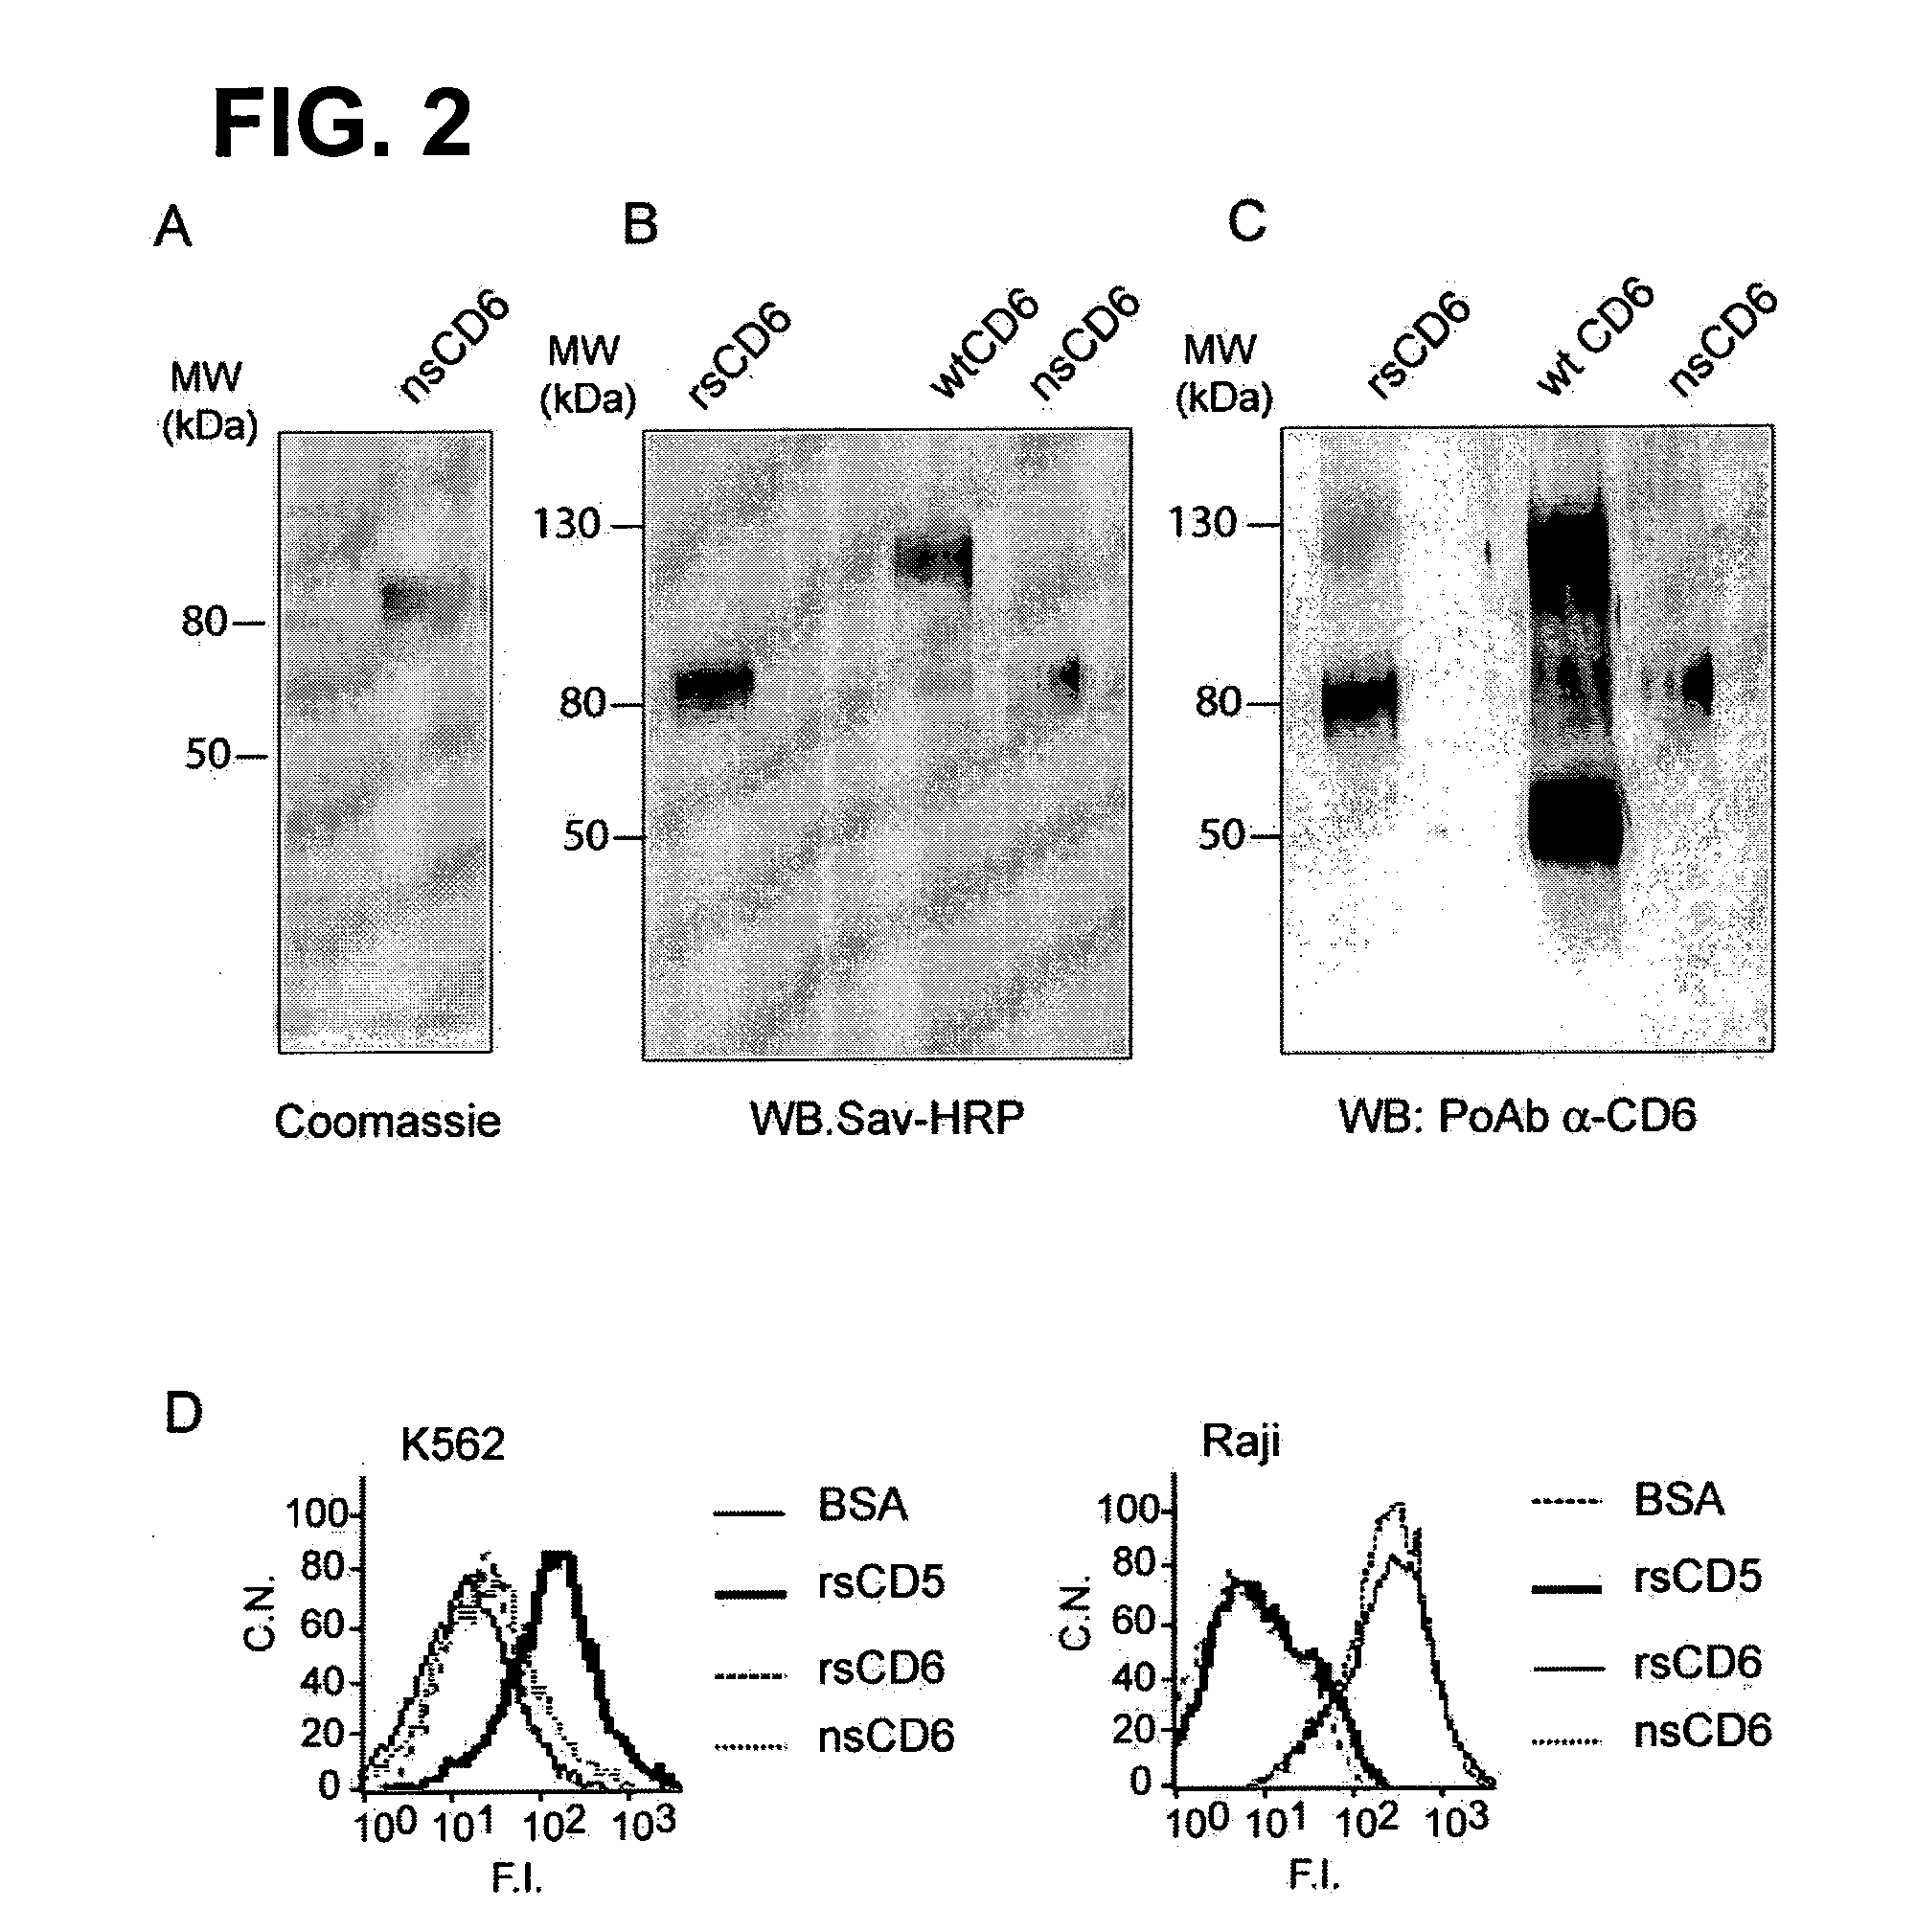 Protein Product for Treatment of Infectious Diseases and Related Inflammatory Processes